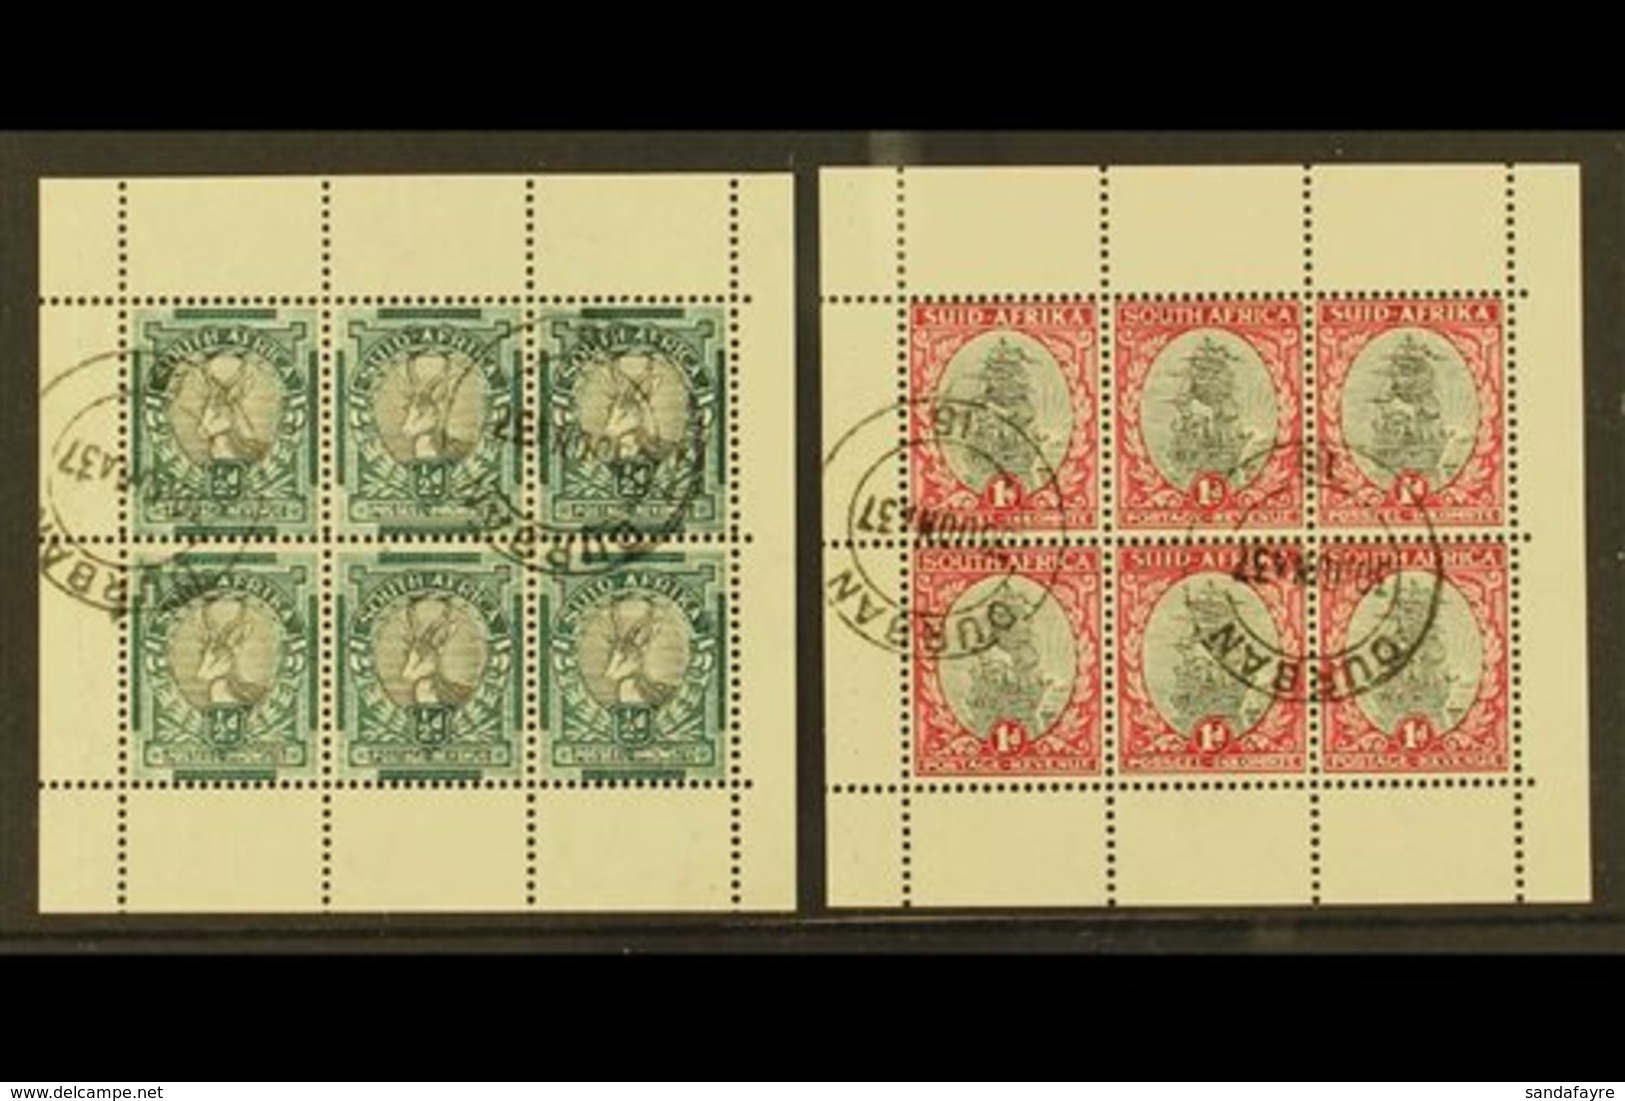 BOOKLET PANES 1937 ½d & 1d  Blank Margins COMPLETE PANES OF SIX, SG 75ca, 56f, Very Fine Used And Scarce Thus (2 Panes). - Non Classés